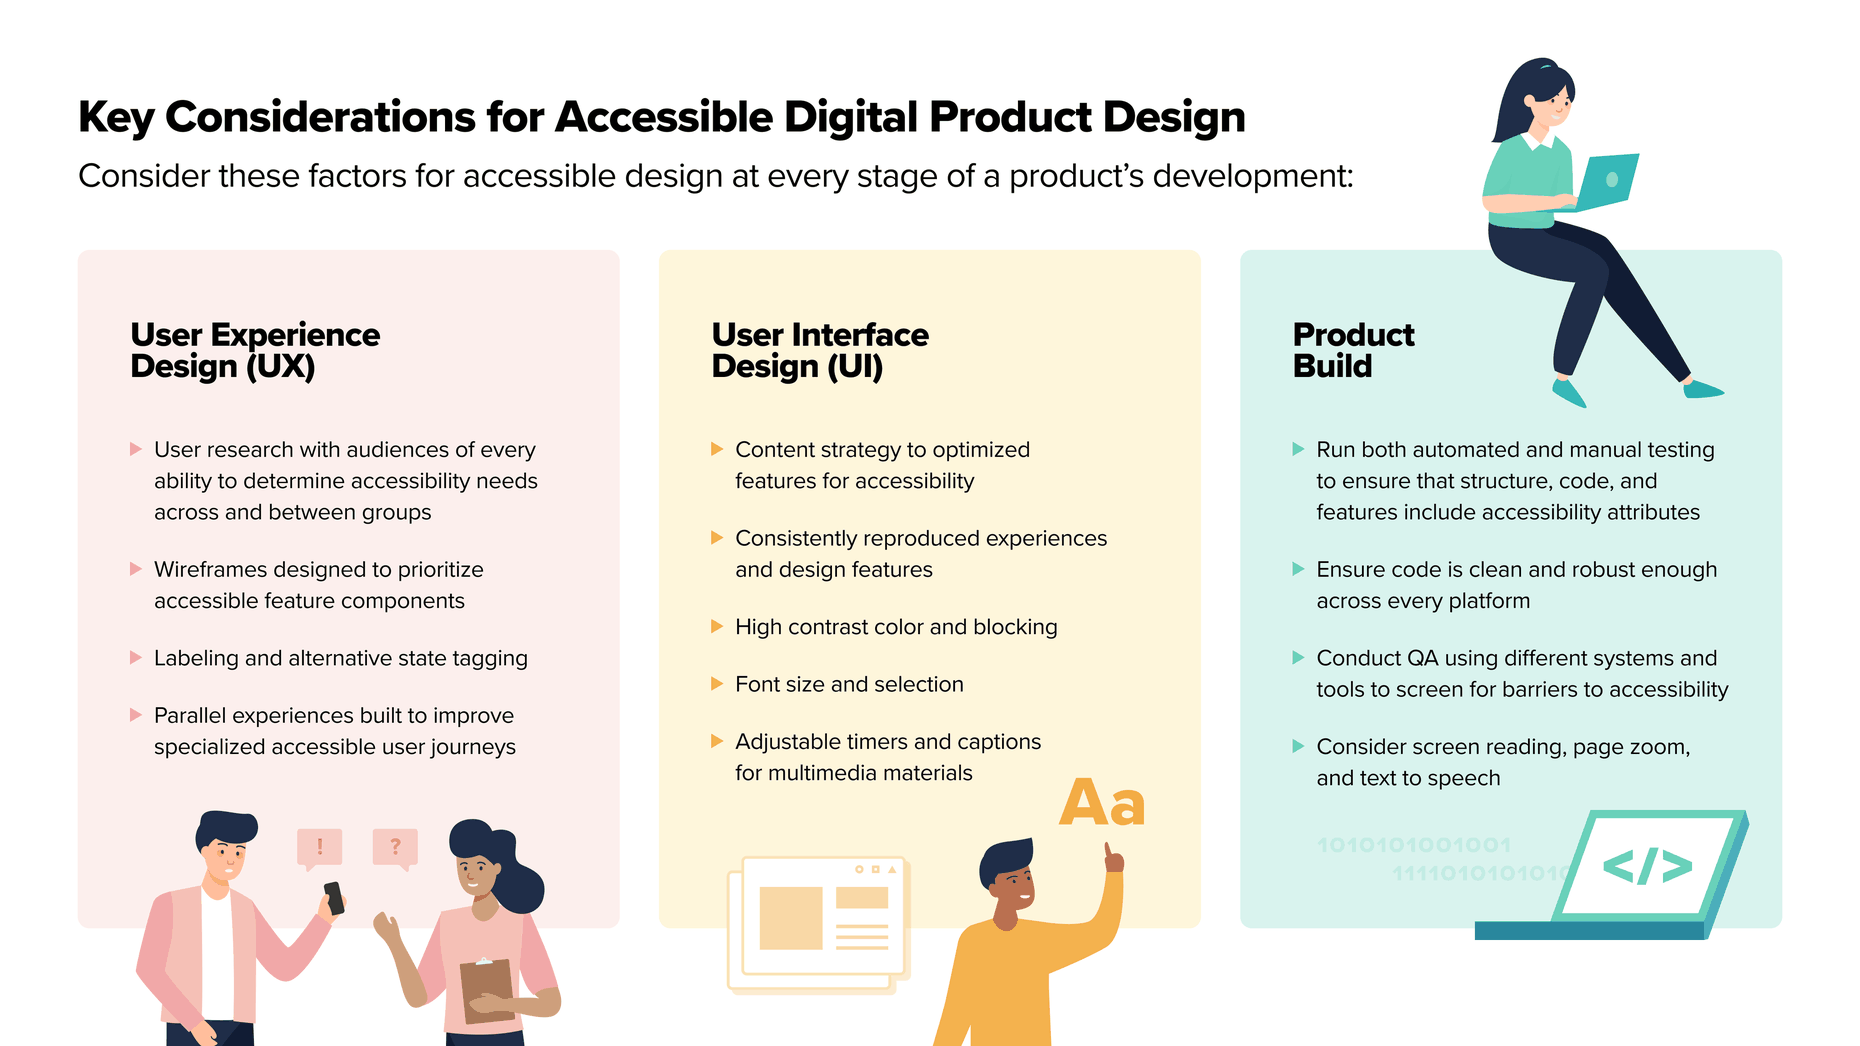 Key Considerations for Accessible Product Design. Consider these factors for accessible design at every stage of a product's development. In column 1: User Experience Design (UX): User research with audiences of every ability to determine accessibility needs across and between groups, wireframes designed to prioritize accessible feature components, labeling and alternative state tagging, parallel experiences built to improve specialized accessible user journeys. Column 2: User Interface Design (UI): Content strategy to optimized features for accessibility, consistently reproduced experiences and design features, high contrast color and blocking, font size and selection, adjustable timers and captions for multimedia materials. Column 3: Product Build: Run both automated and manual testing to ensure that structure, code, and features include accessibility attributes, ensure code is clean and robust enough across every platform, conduct QA using different systems and tools to screen for barriers to accessibility, consider screen reading, page zoom, and text to speech.